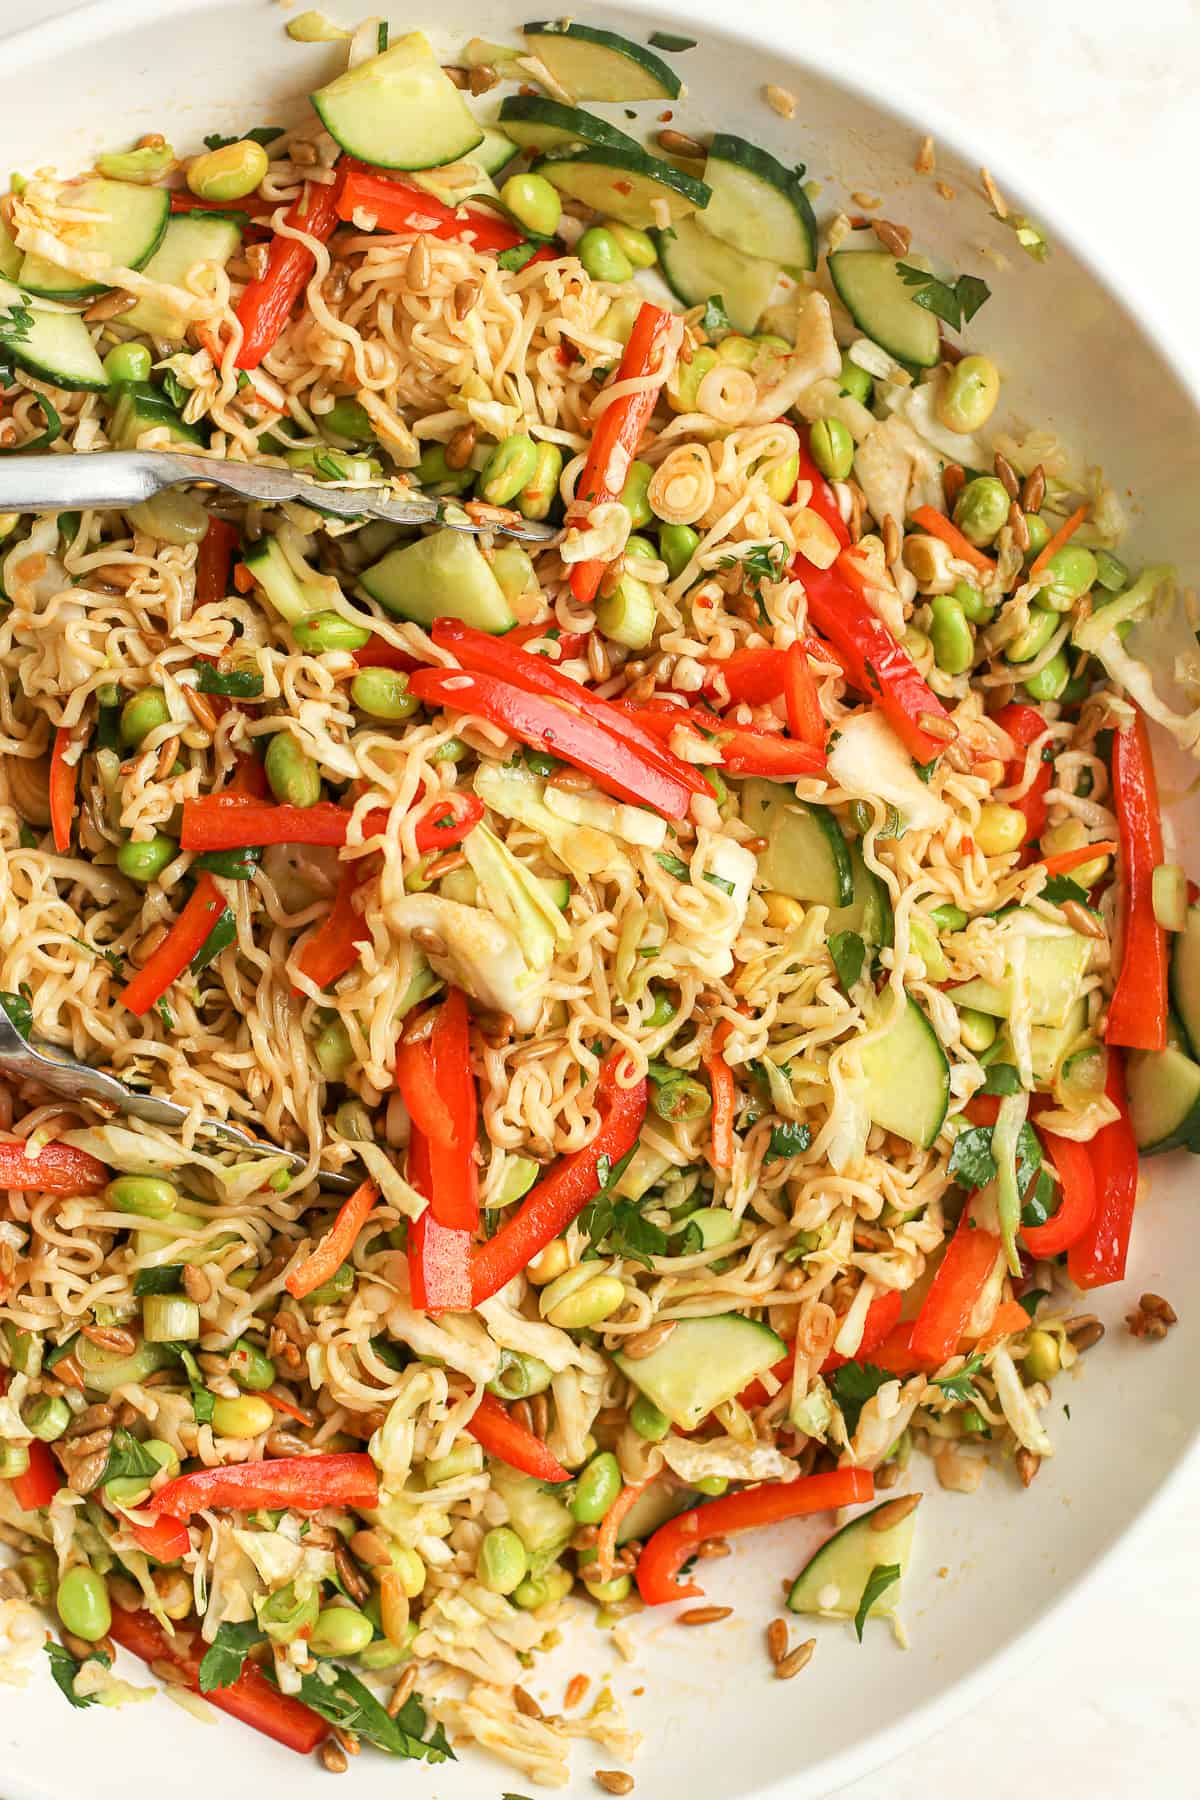 A bowl of the ramen salad with cucumbers and peppers.